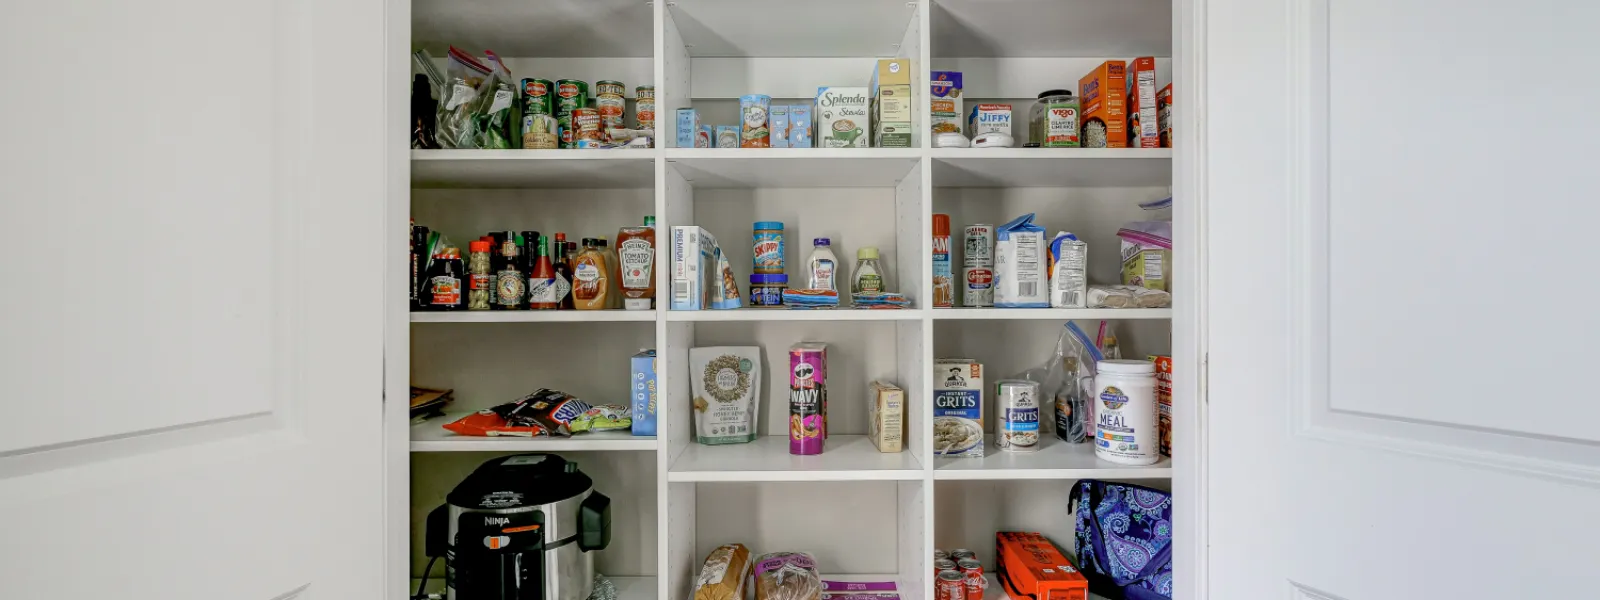 white painted pantry filled with food items and kitchen appliances